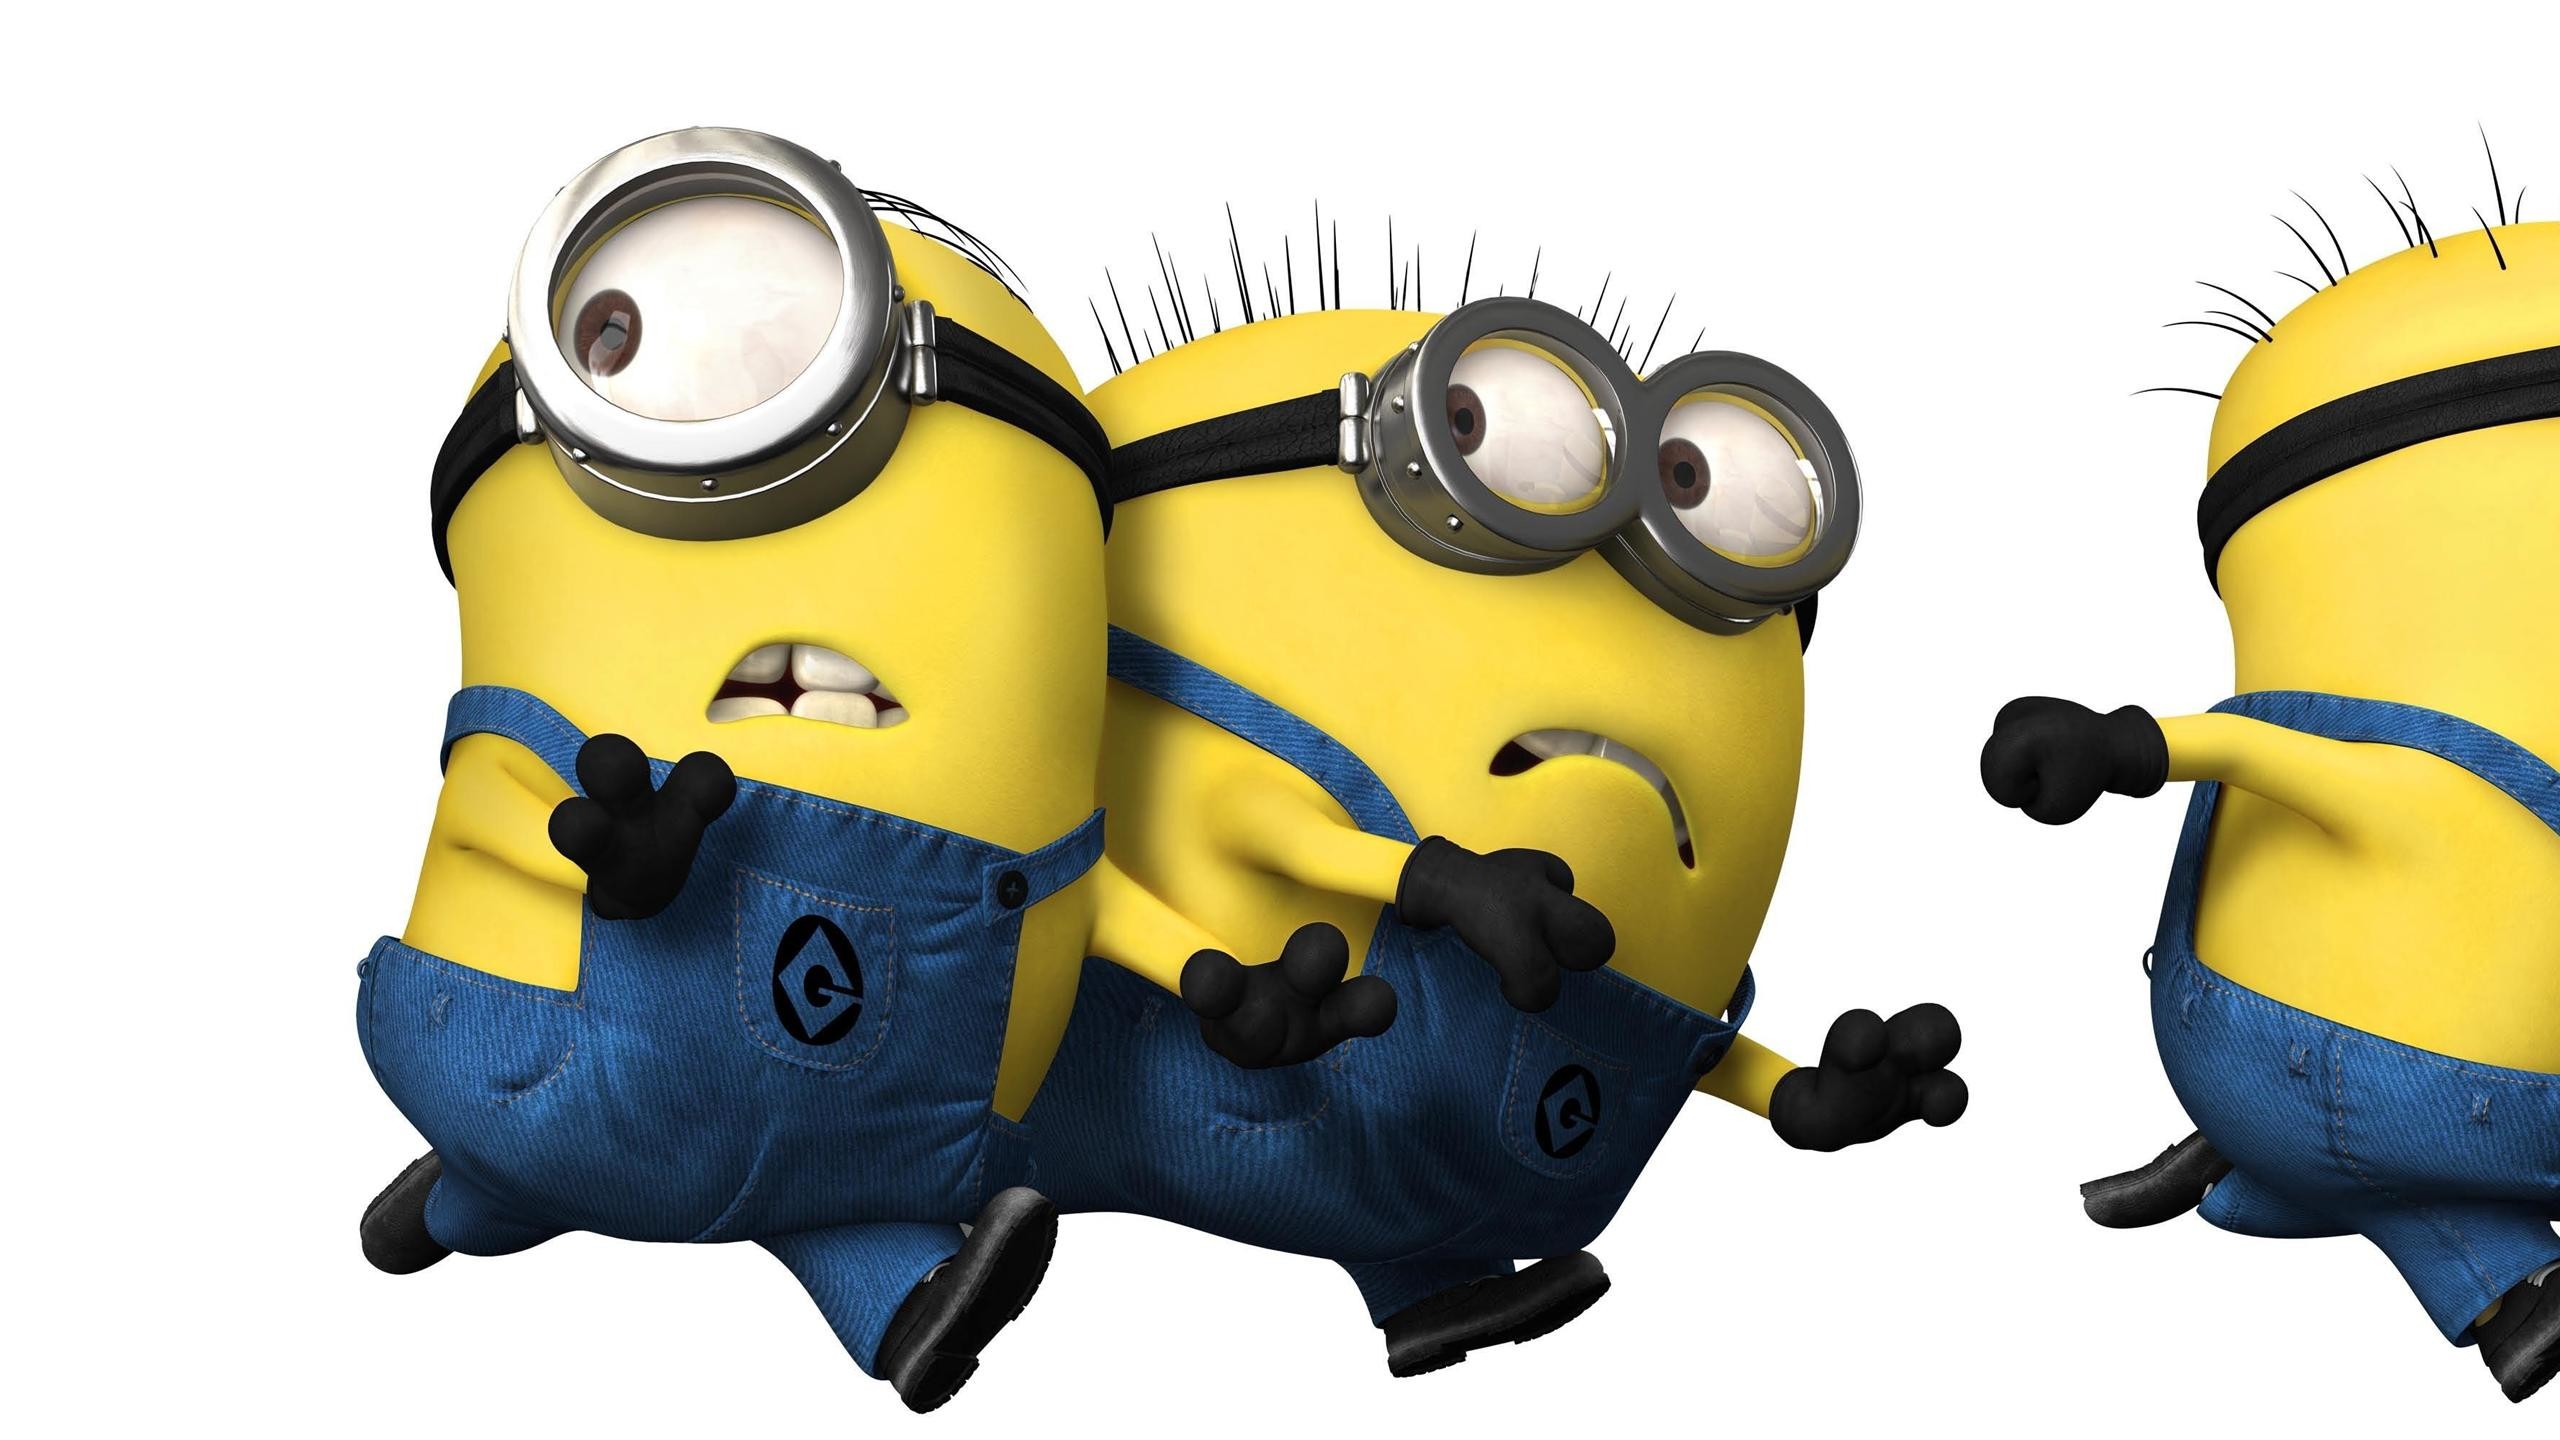 Cartoons Despicable Me Funny Wallpapers Images Photos 25601440 Minion Despicable Me Wallpapers 38